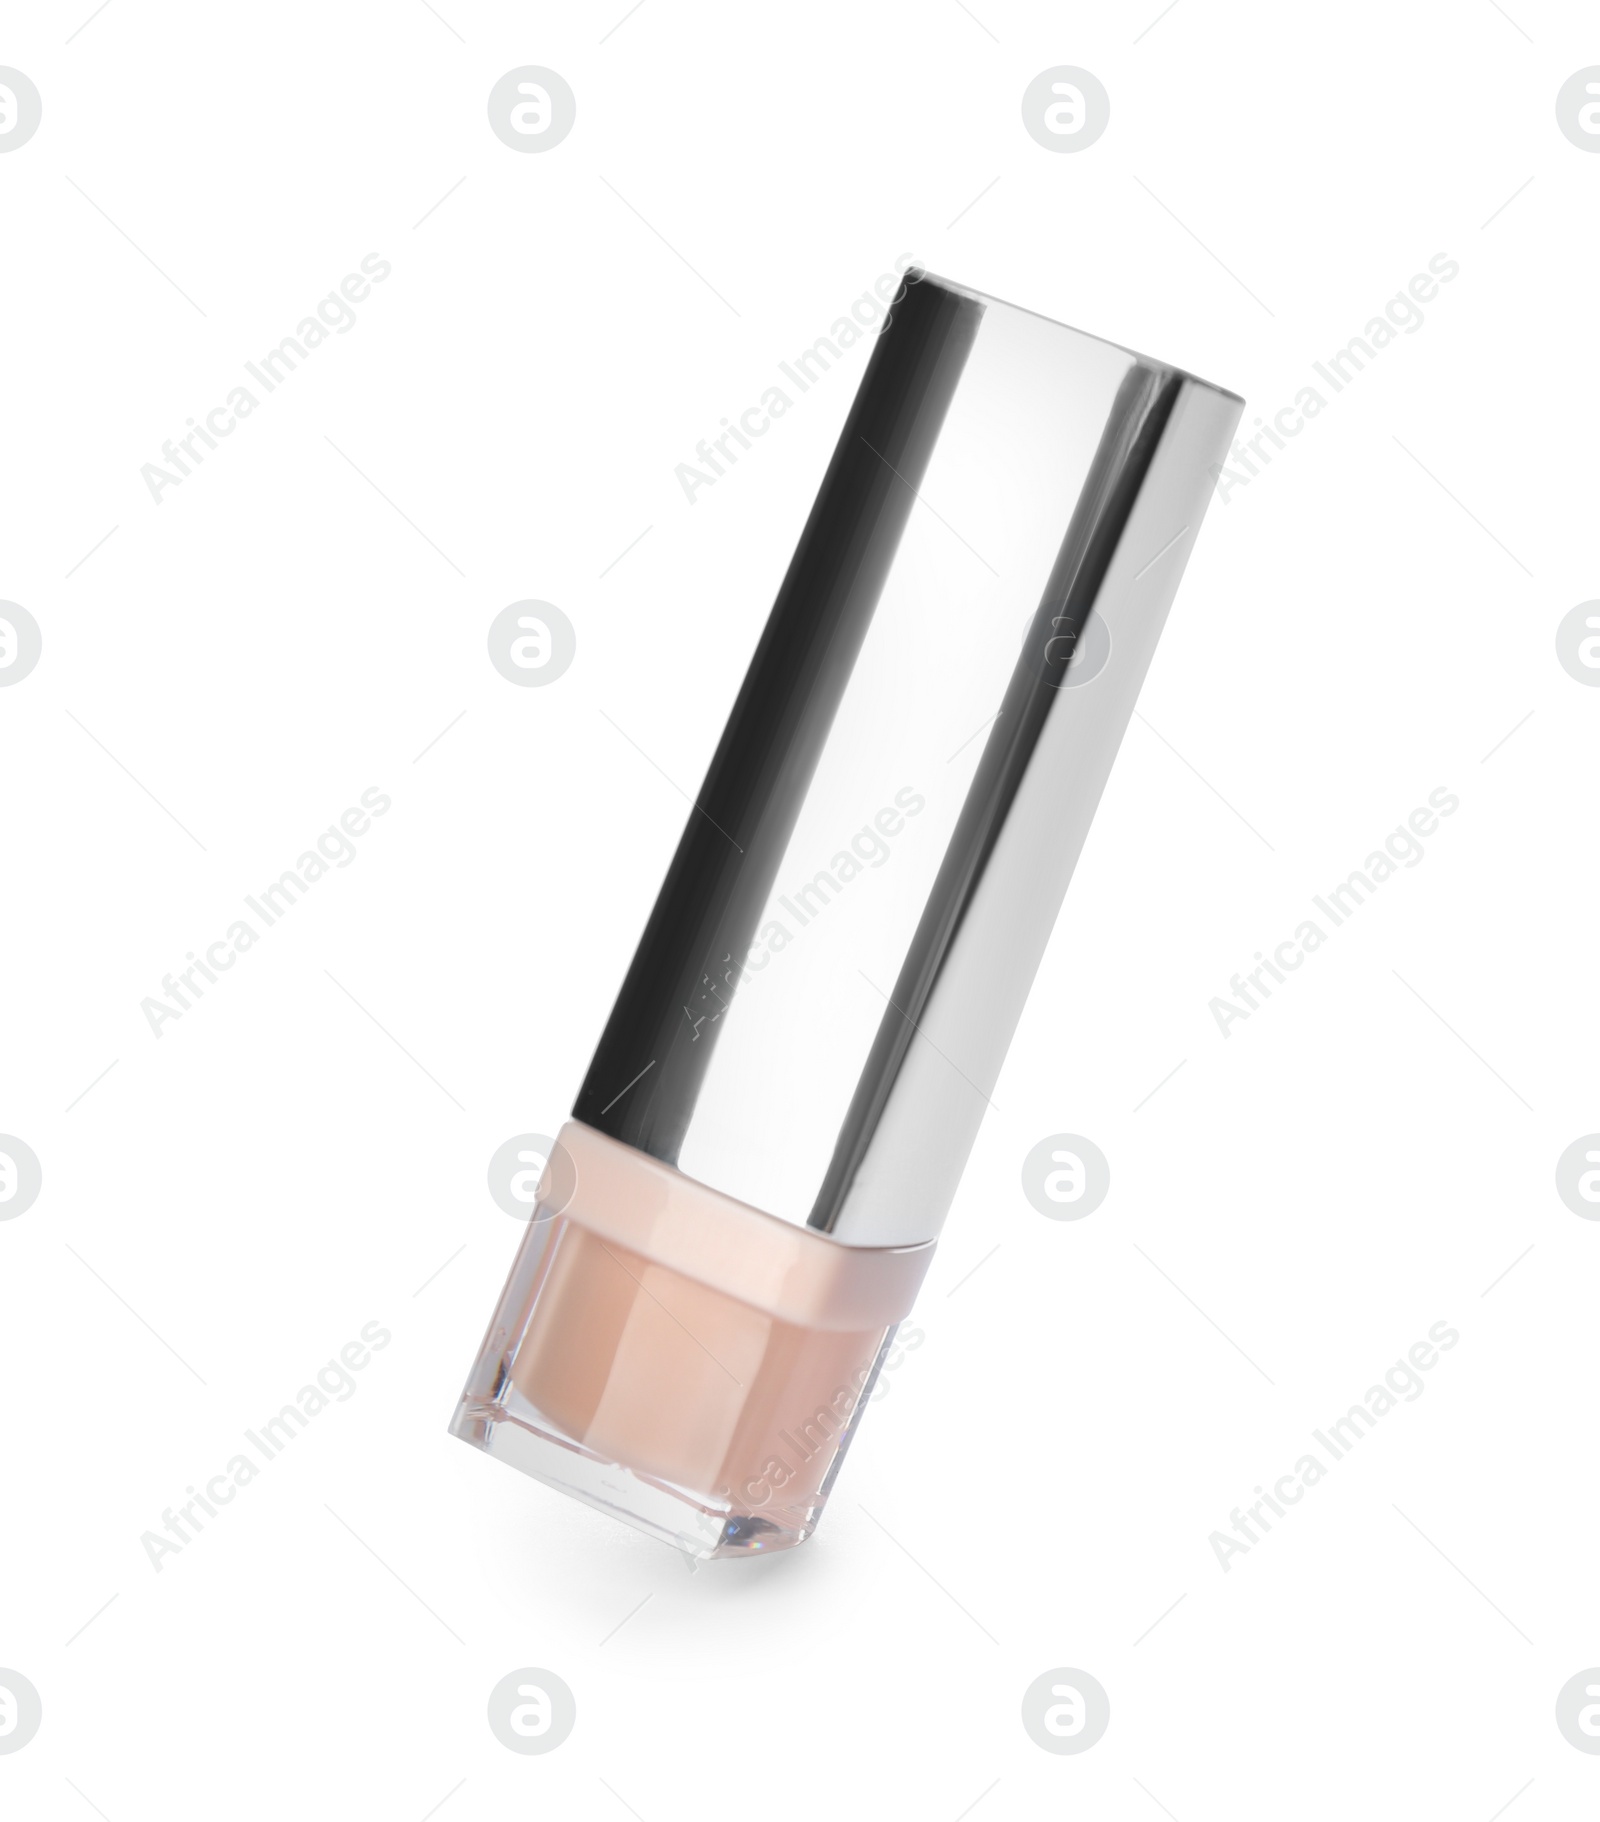 Photo of Stick concealer isolated on white. Makeup product